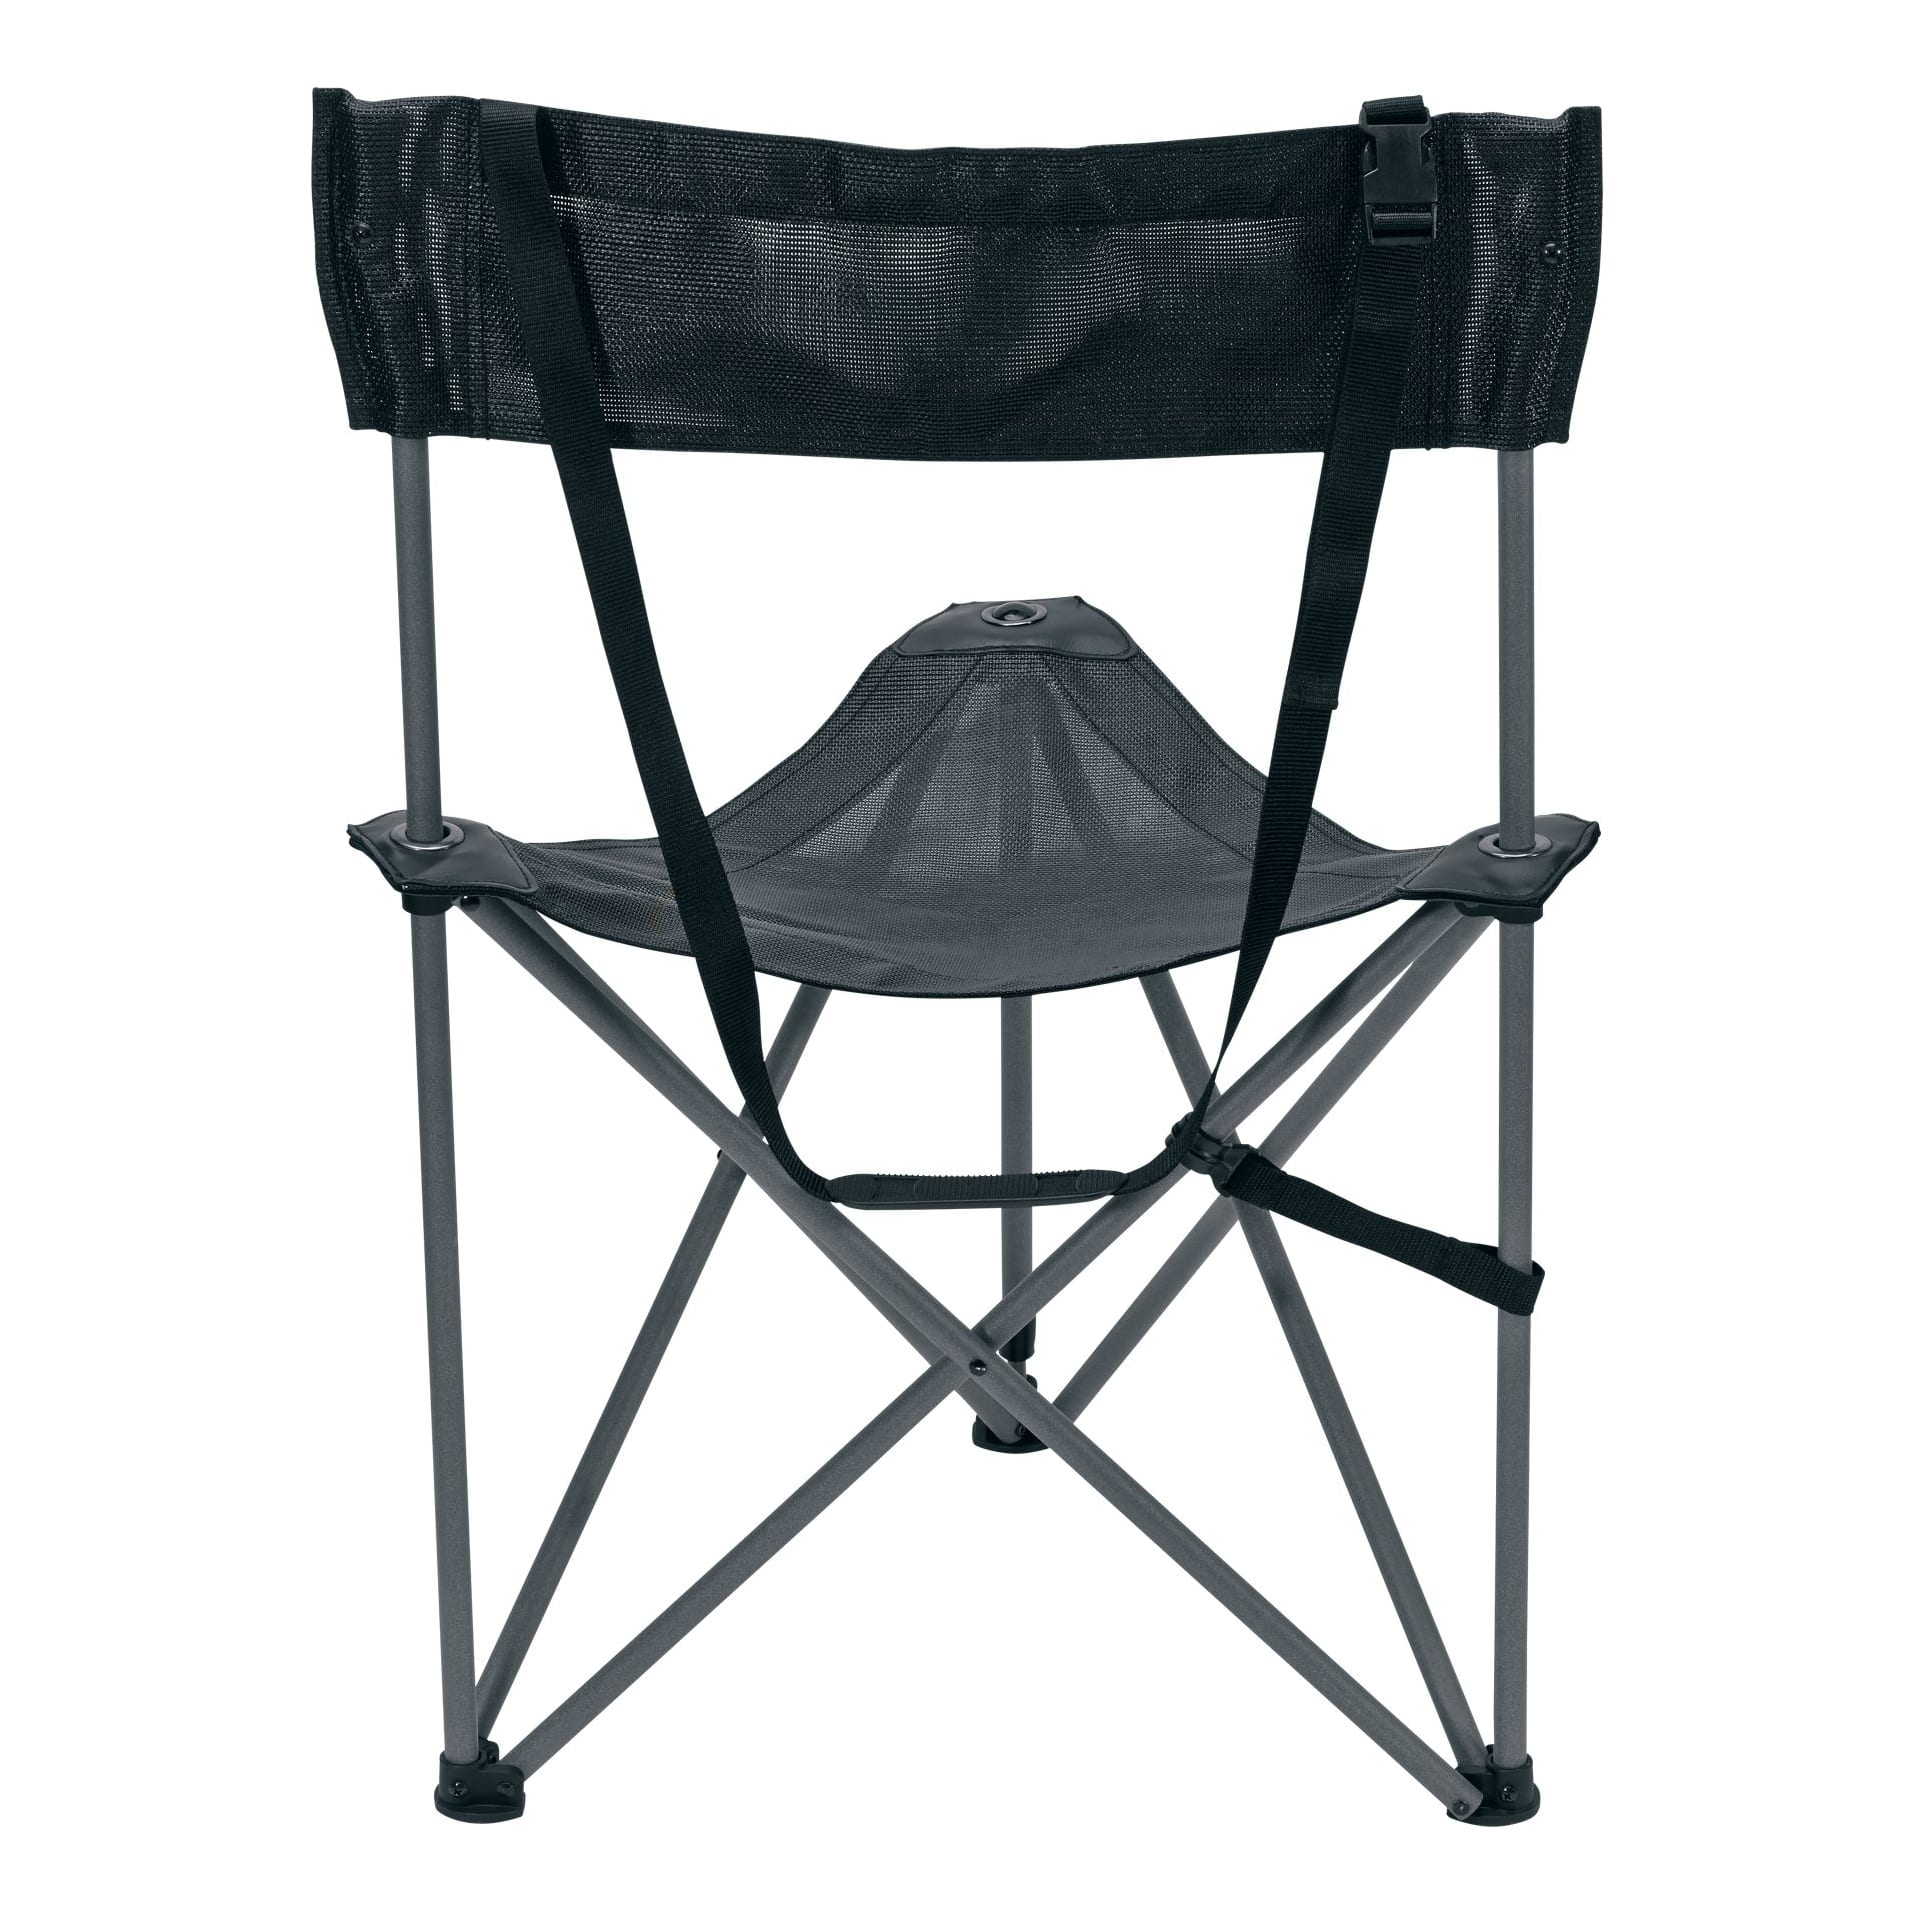 Cabela's Comfort Max Tripod Blind Chair